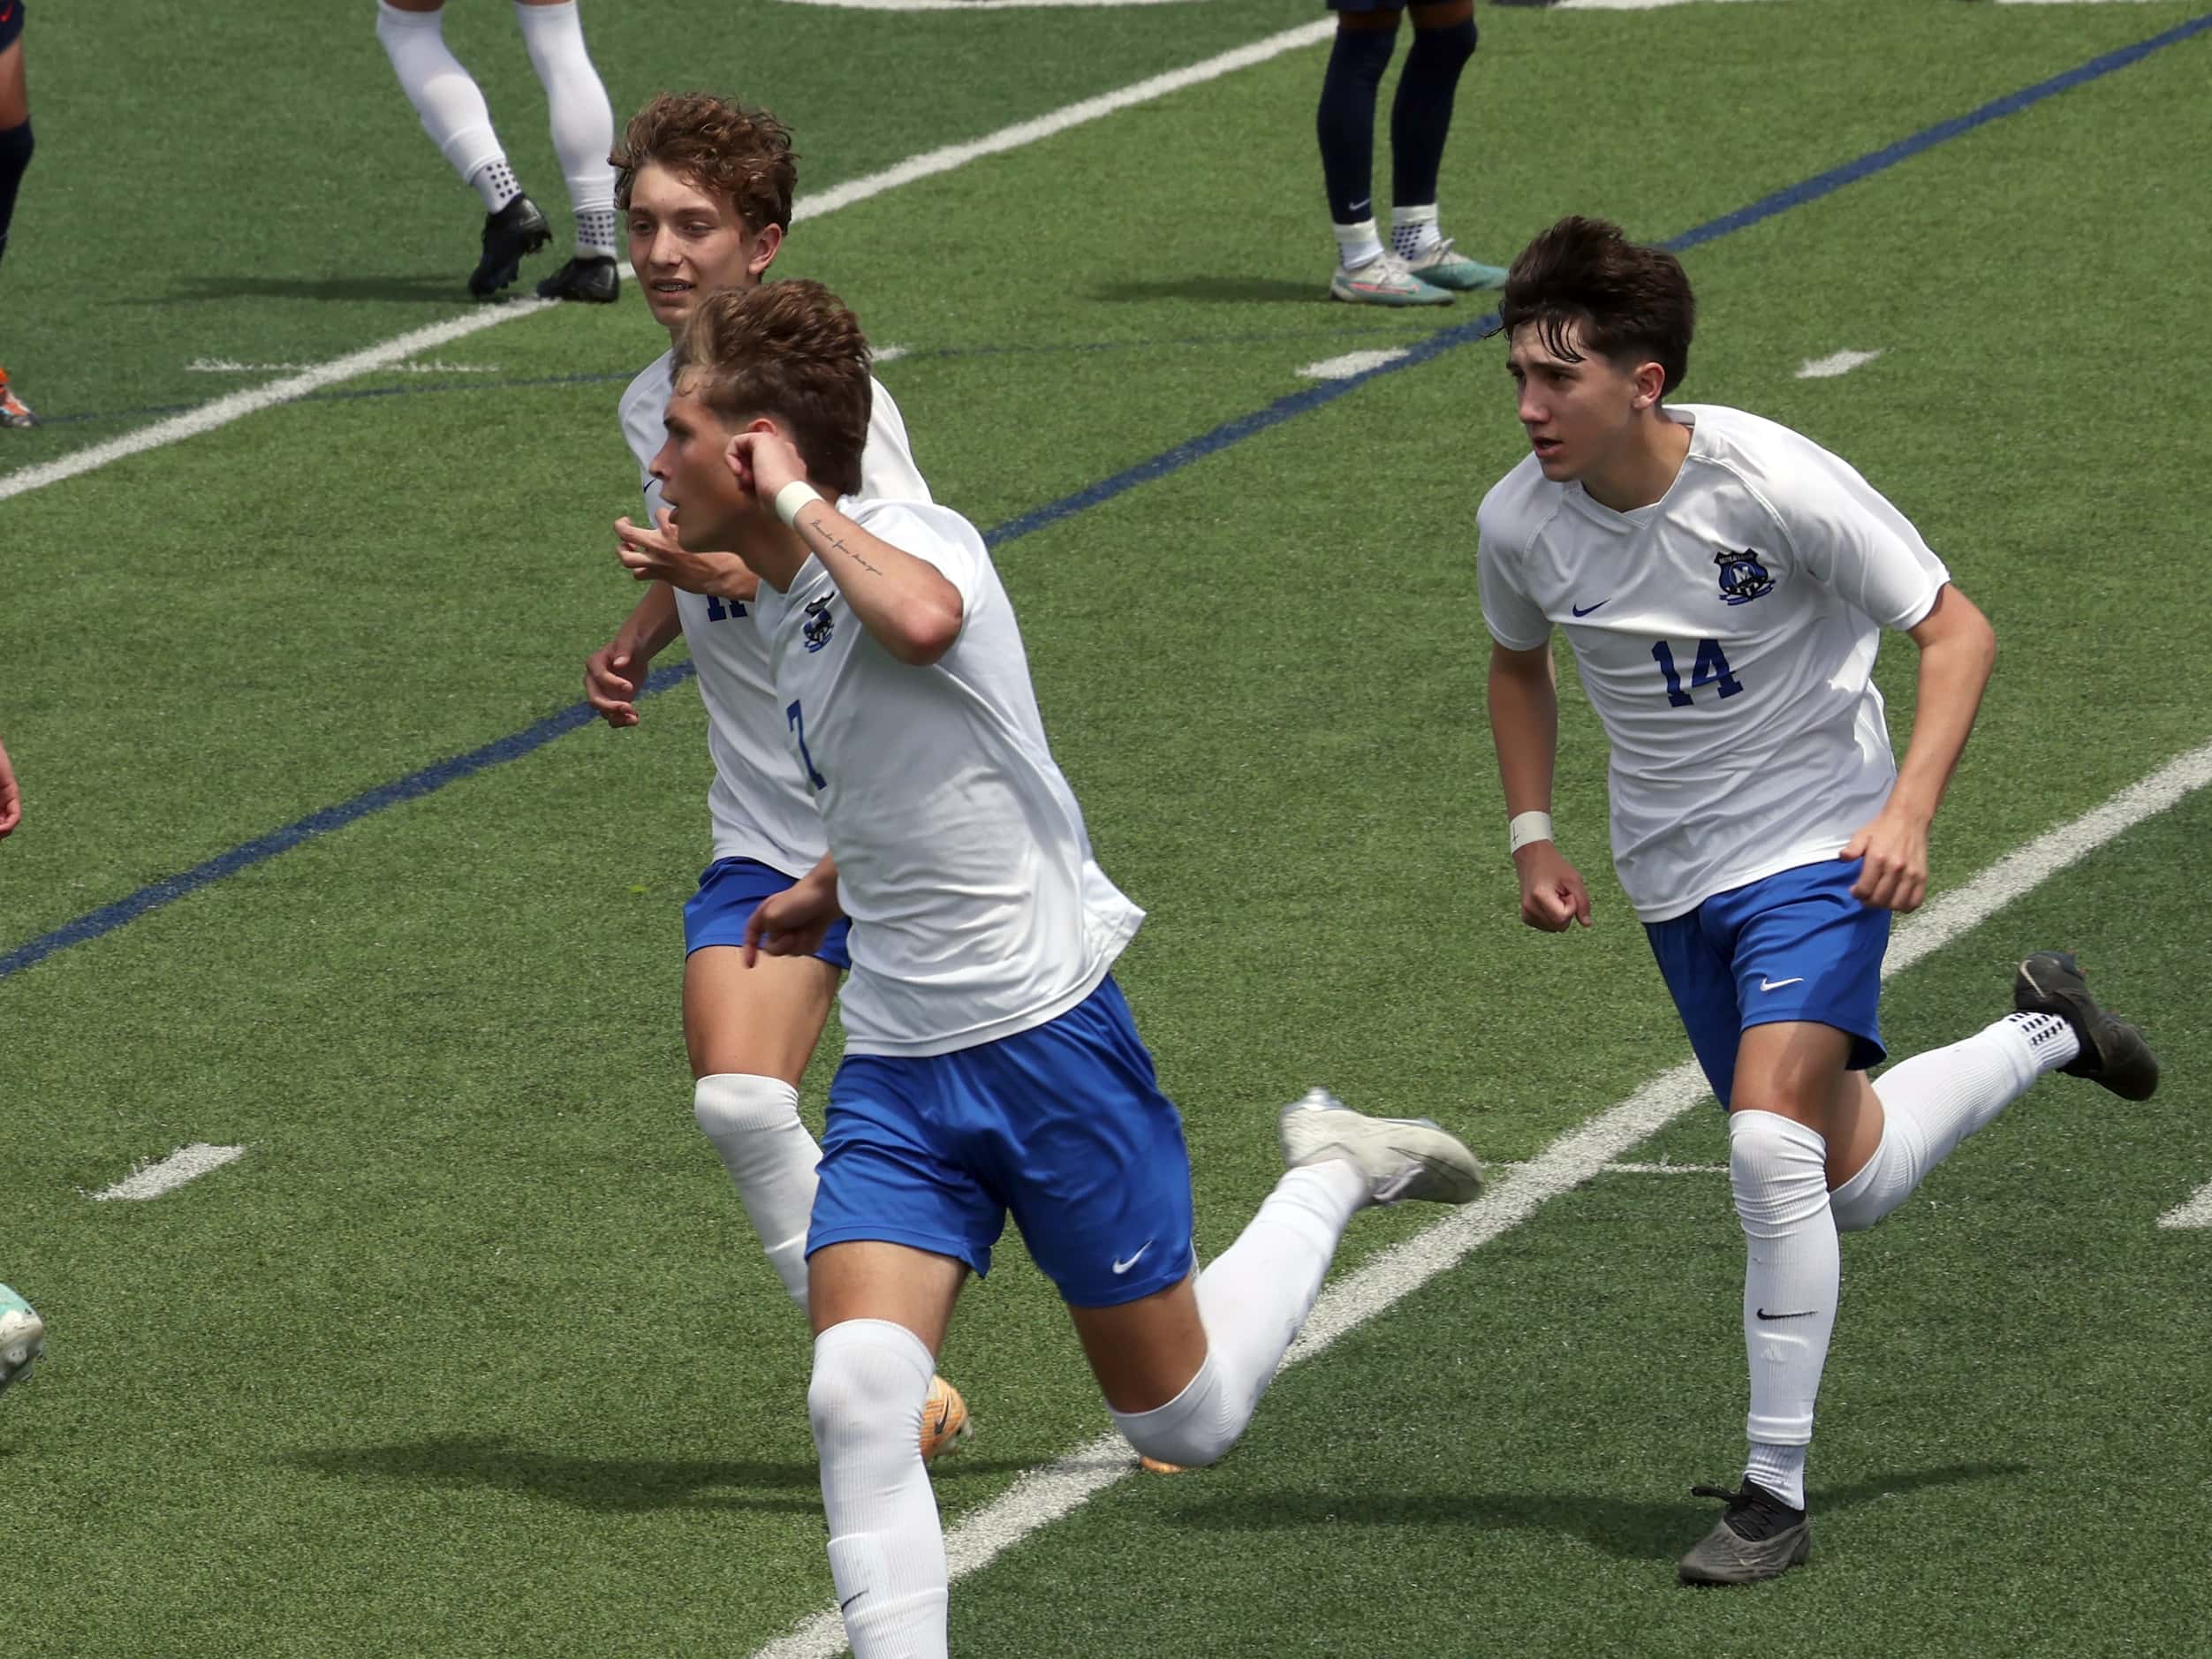  Midlothian midfielder Caden Naizer (7) , center, gestures toward fans in the stands as they...